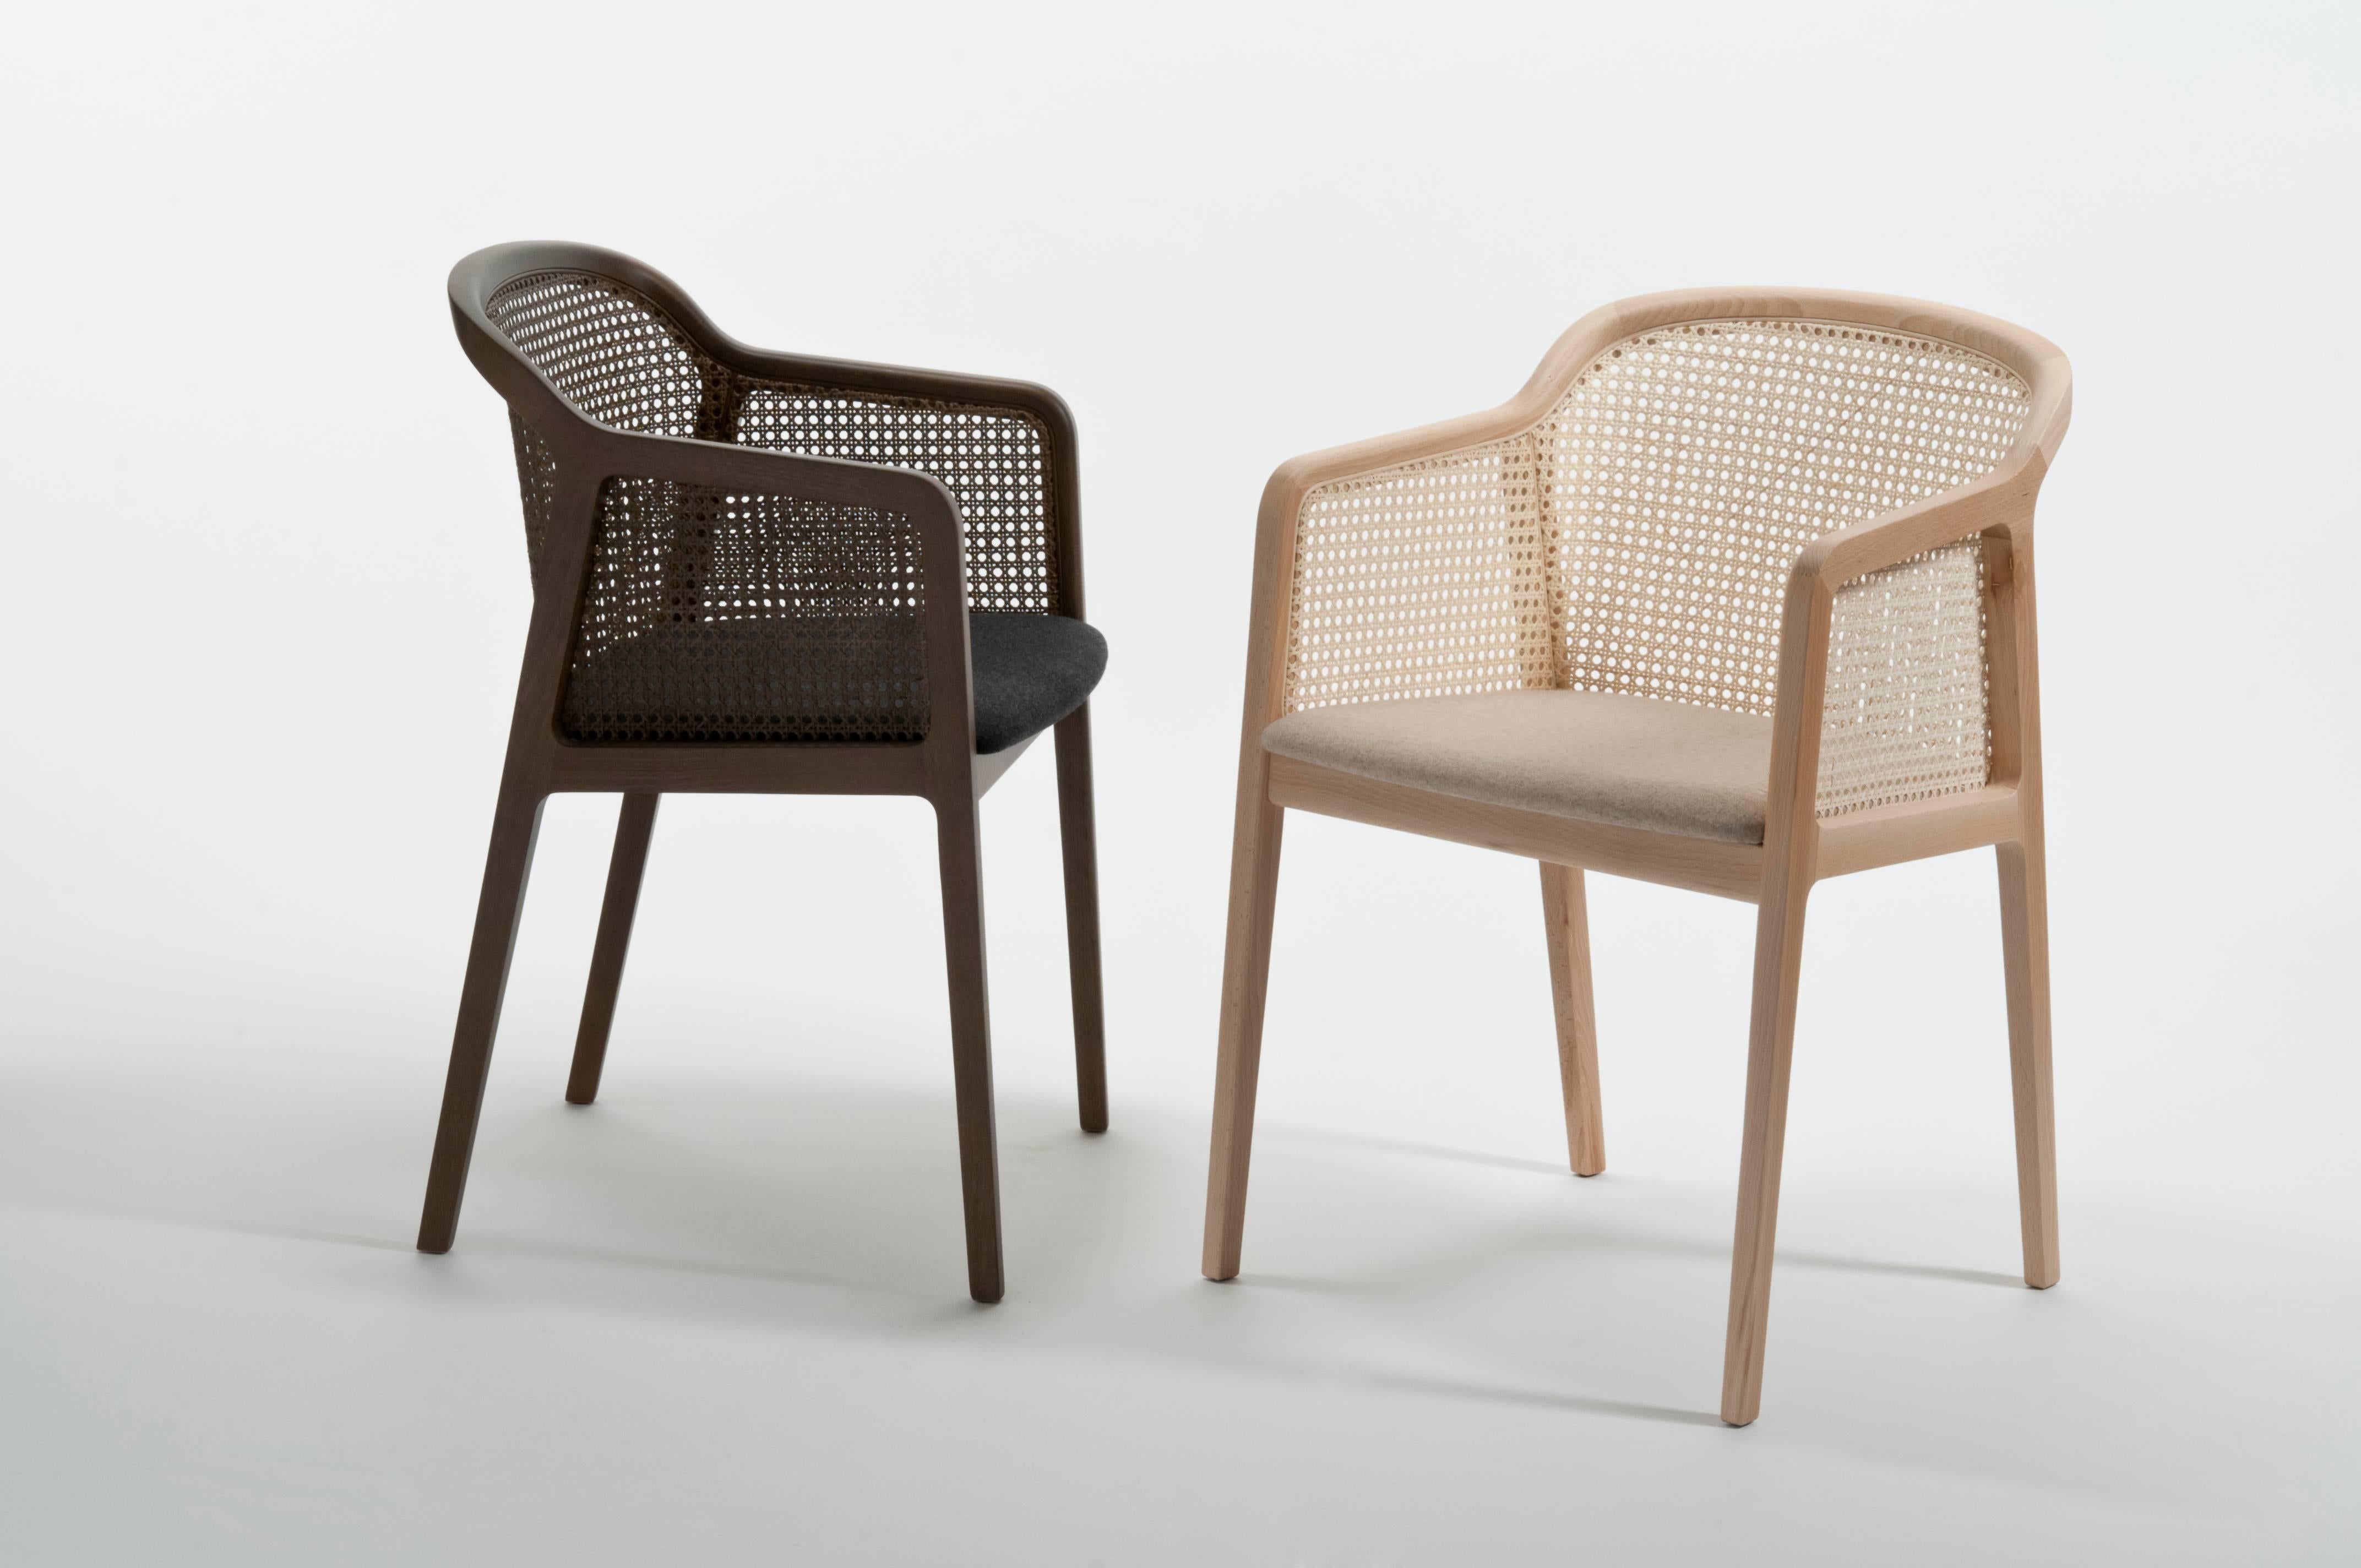 Vienna Armchair by Colé, Modernity Design in Wood and Straw, Green Upholstered Seat en vente 7